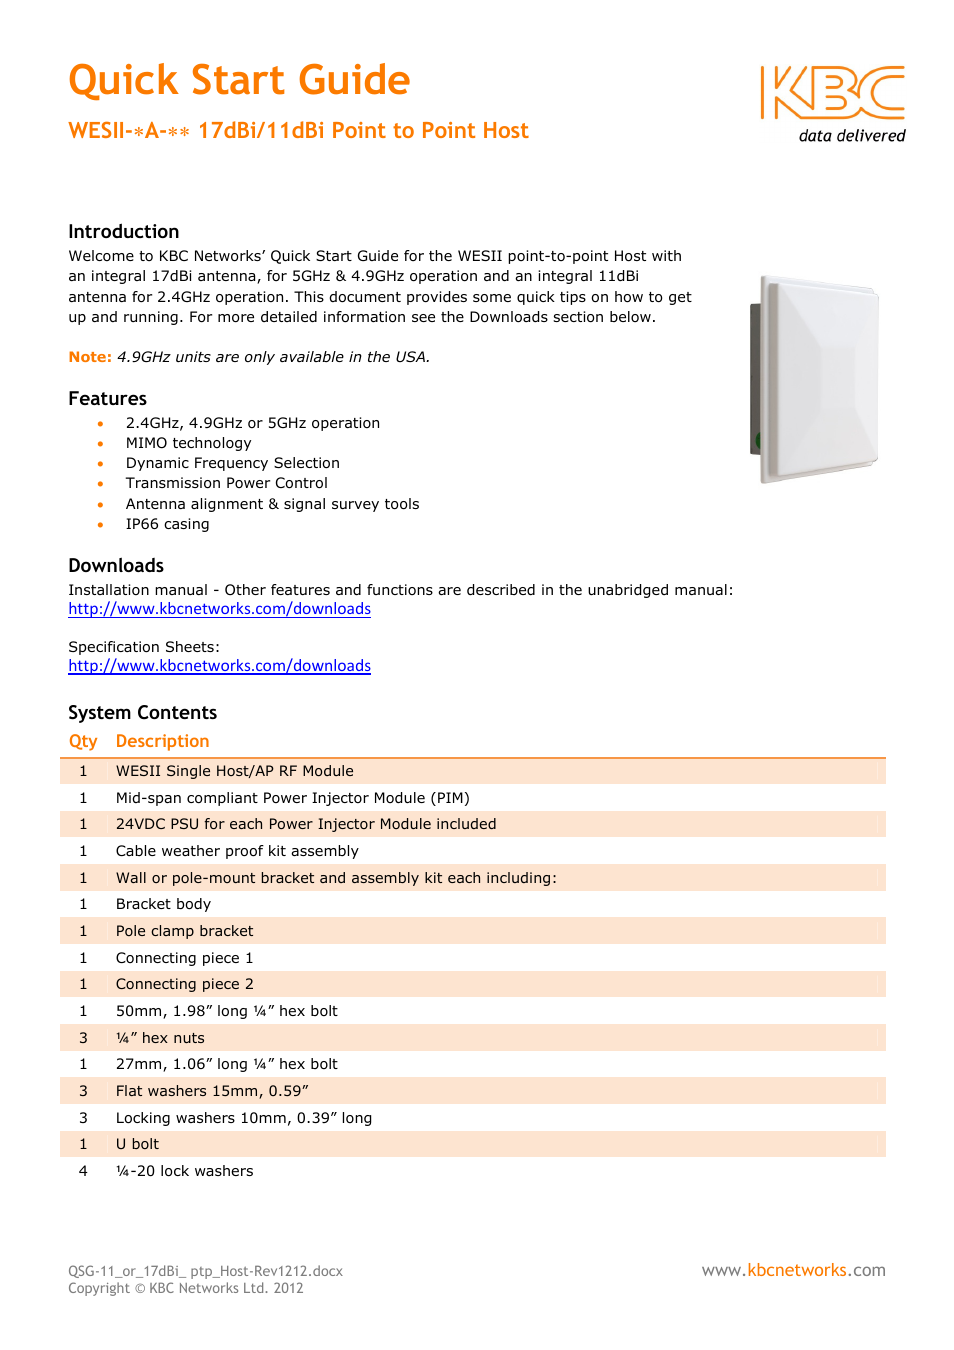 WESII 2/5dBi Point-to-Multipoint PoE Host